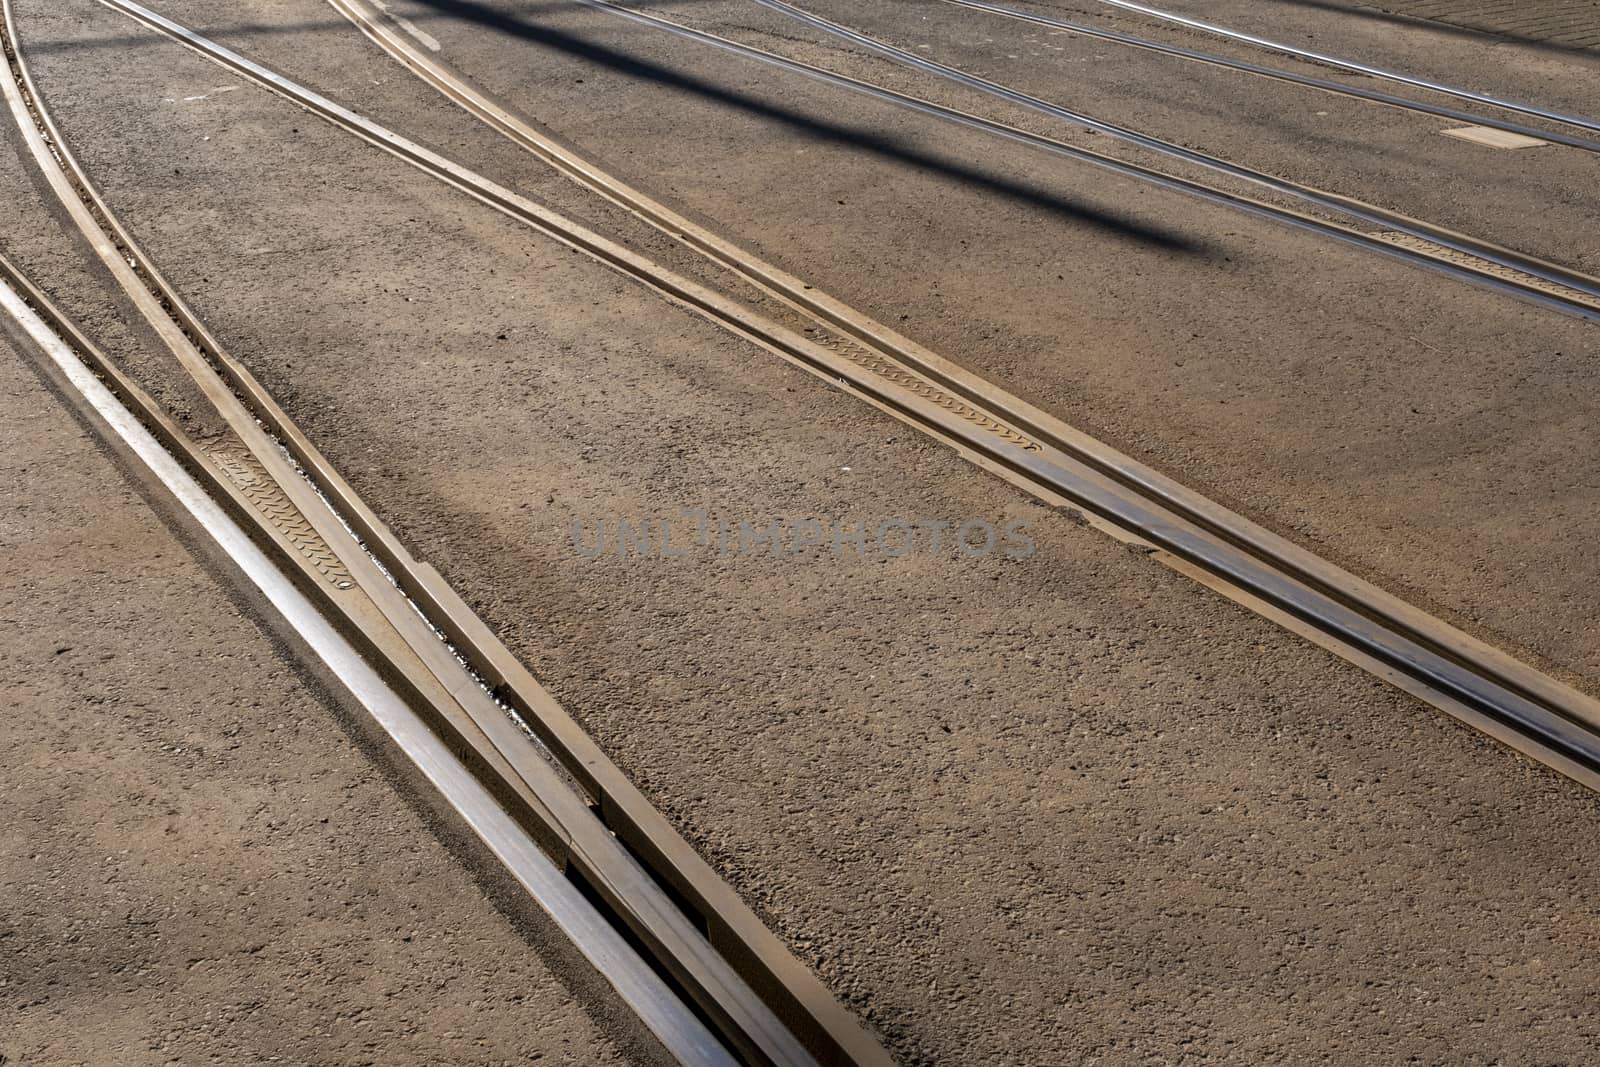 Tram tracks crossing each other. close up by Tjeerdkruse